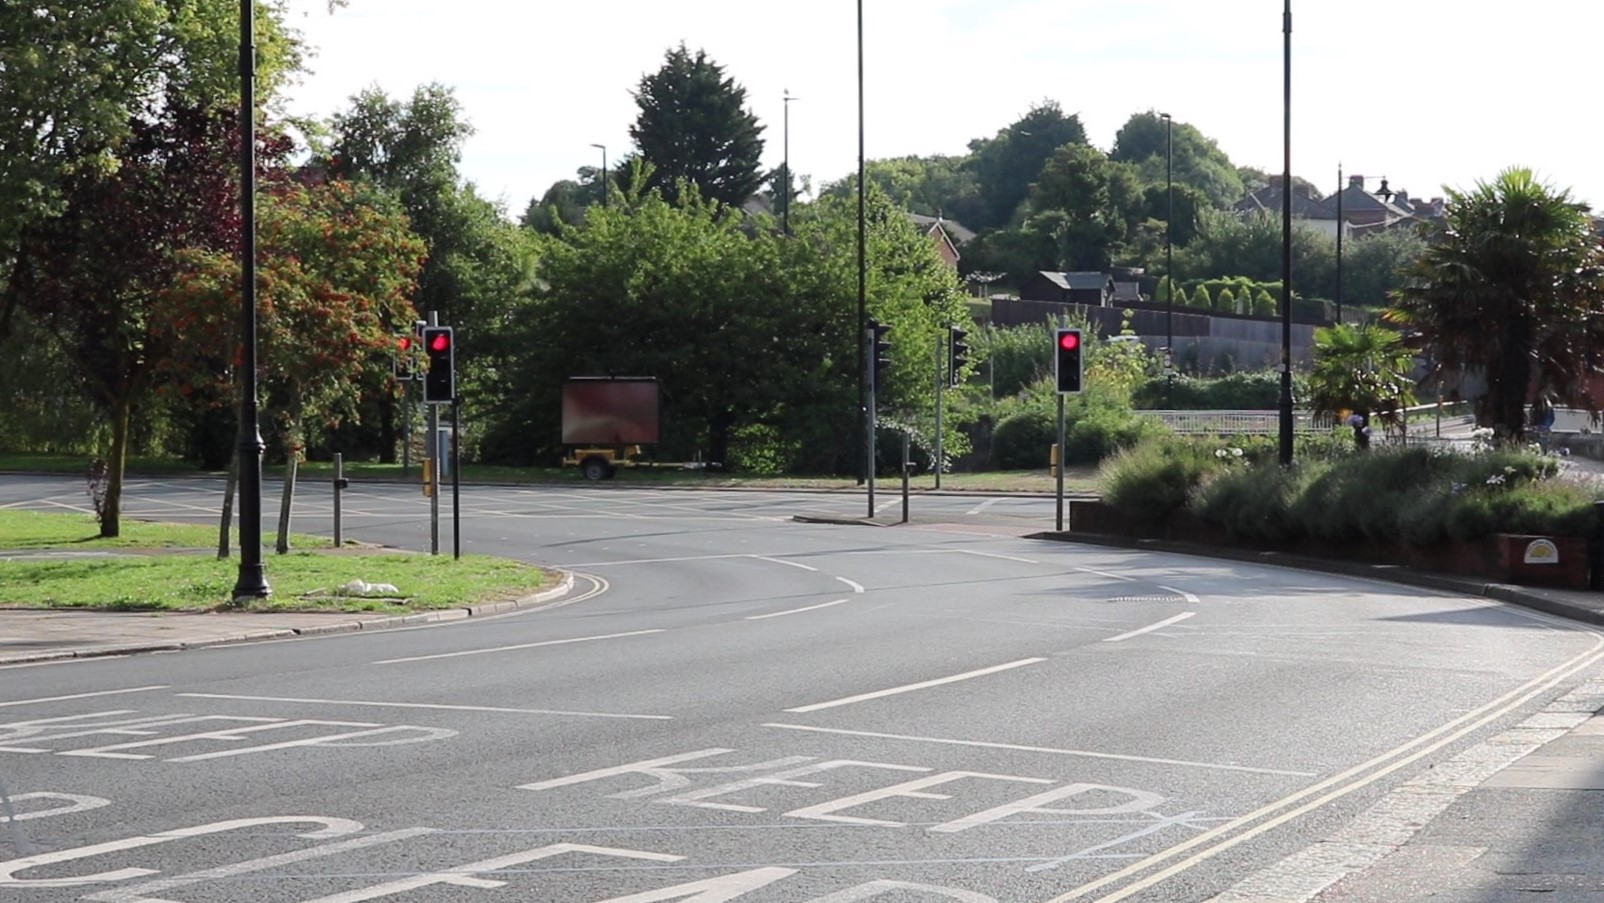 three lane road with traffic lights on red at the junction with Coppins Bridge roundabout, greenery and trees in the background and some houses